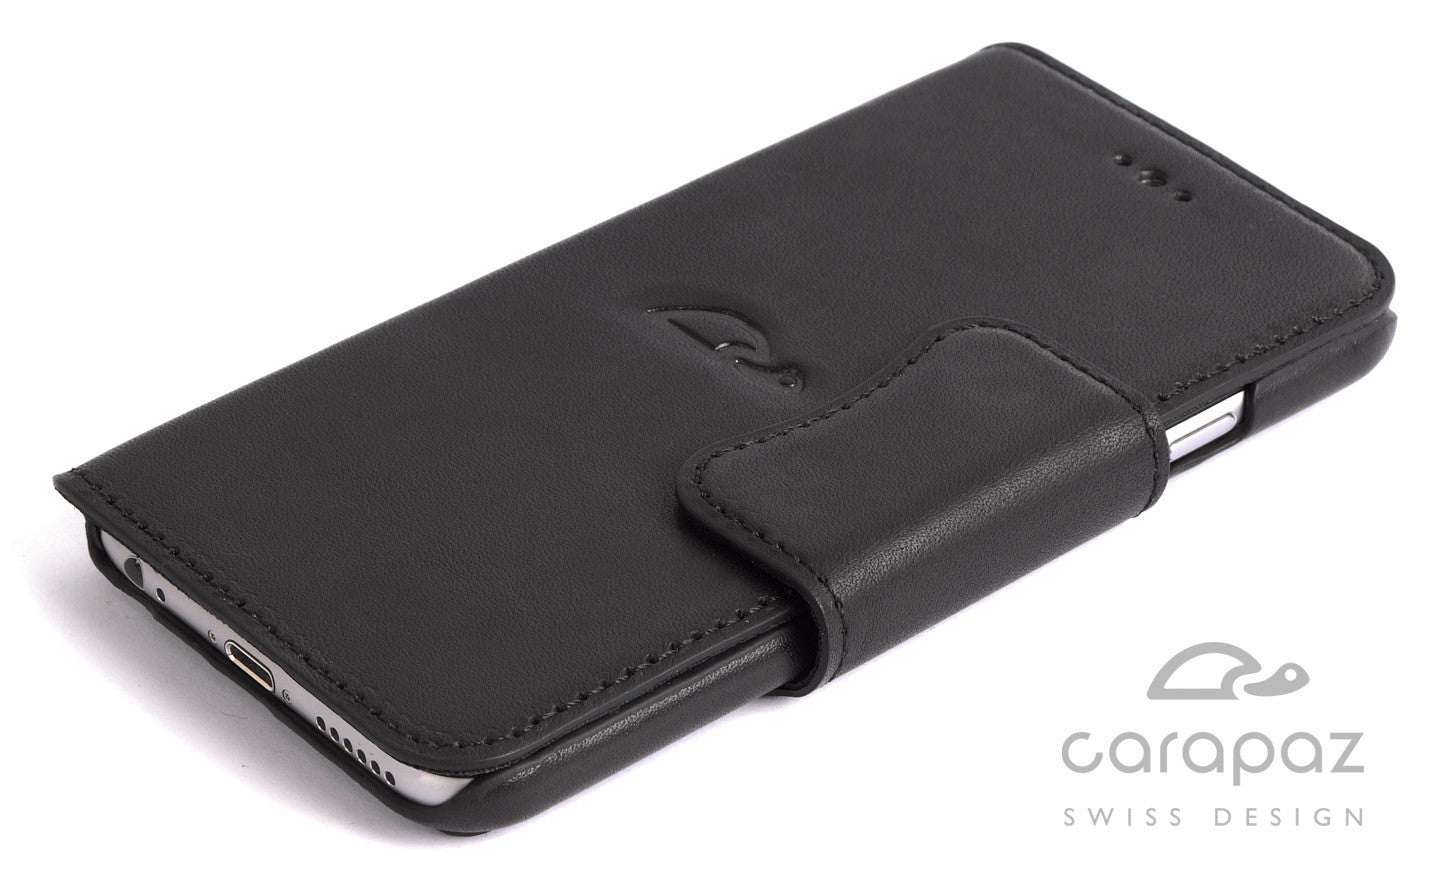 iPhone 6 leather wallet case - Carapaz